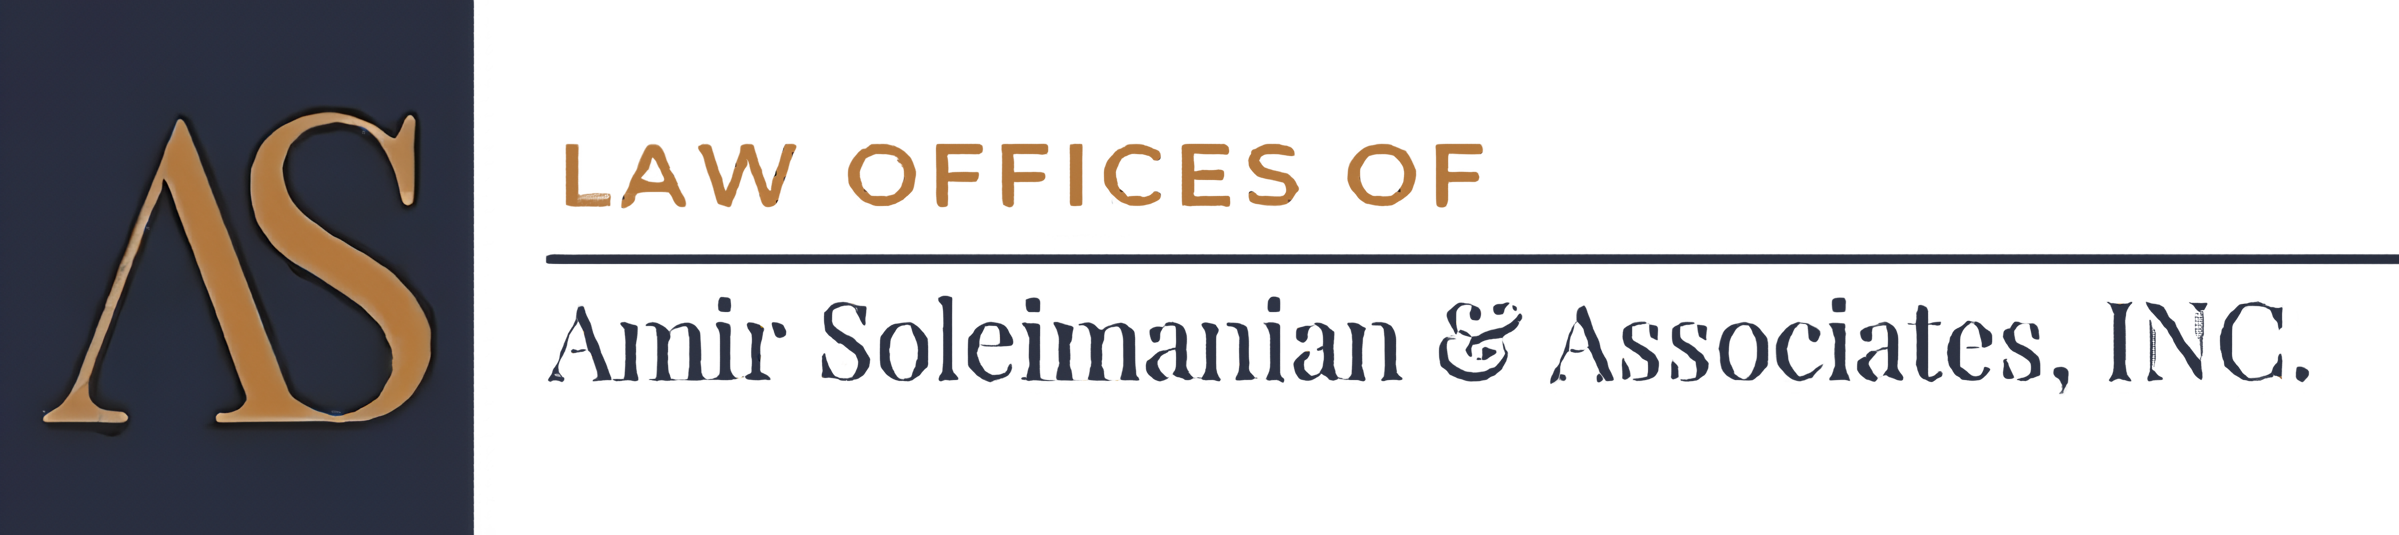 Mr. Ticket | Law Offices of Amir Soleimanian and Associates INC.